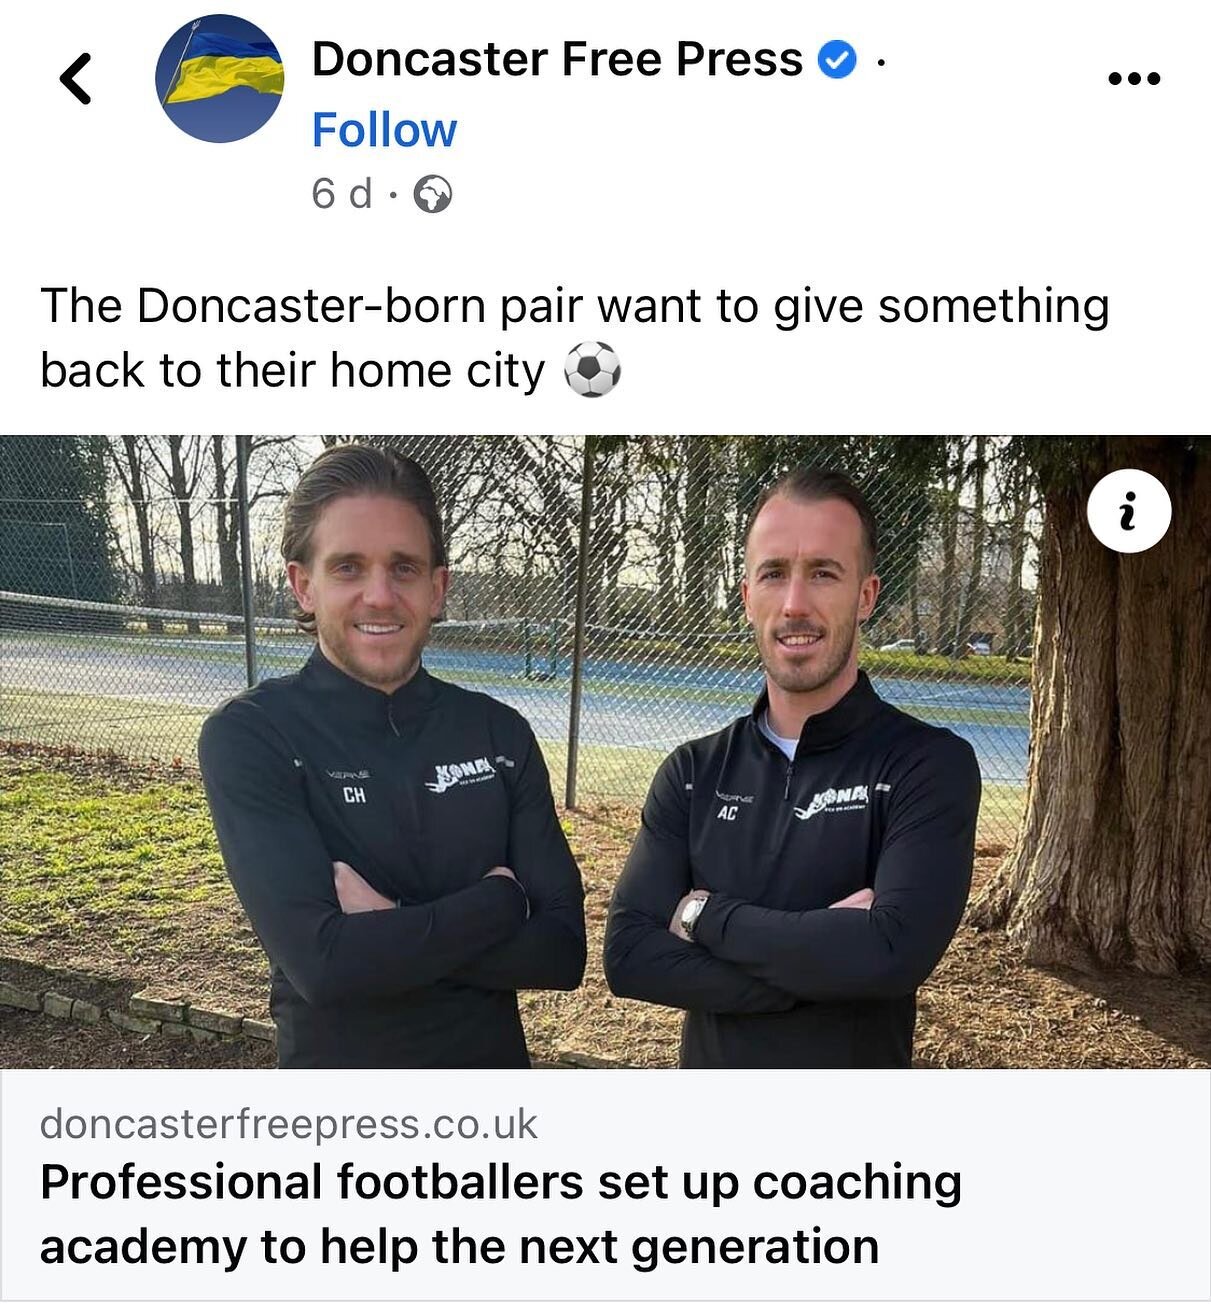 It was great for our co-owners and lead coaches Callum Howe and Alex Cairns to chat with Steve Jones at the Doncaster Free Press about the aspirations of our academy and some of the reasons why we were so passionate about getting started.

If you are